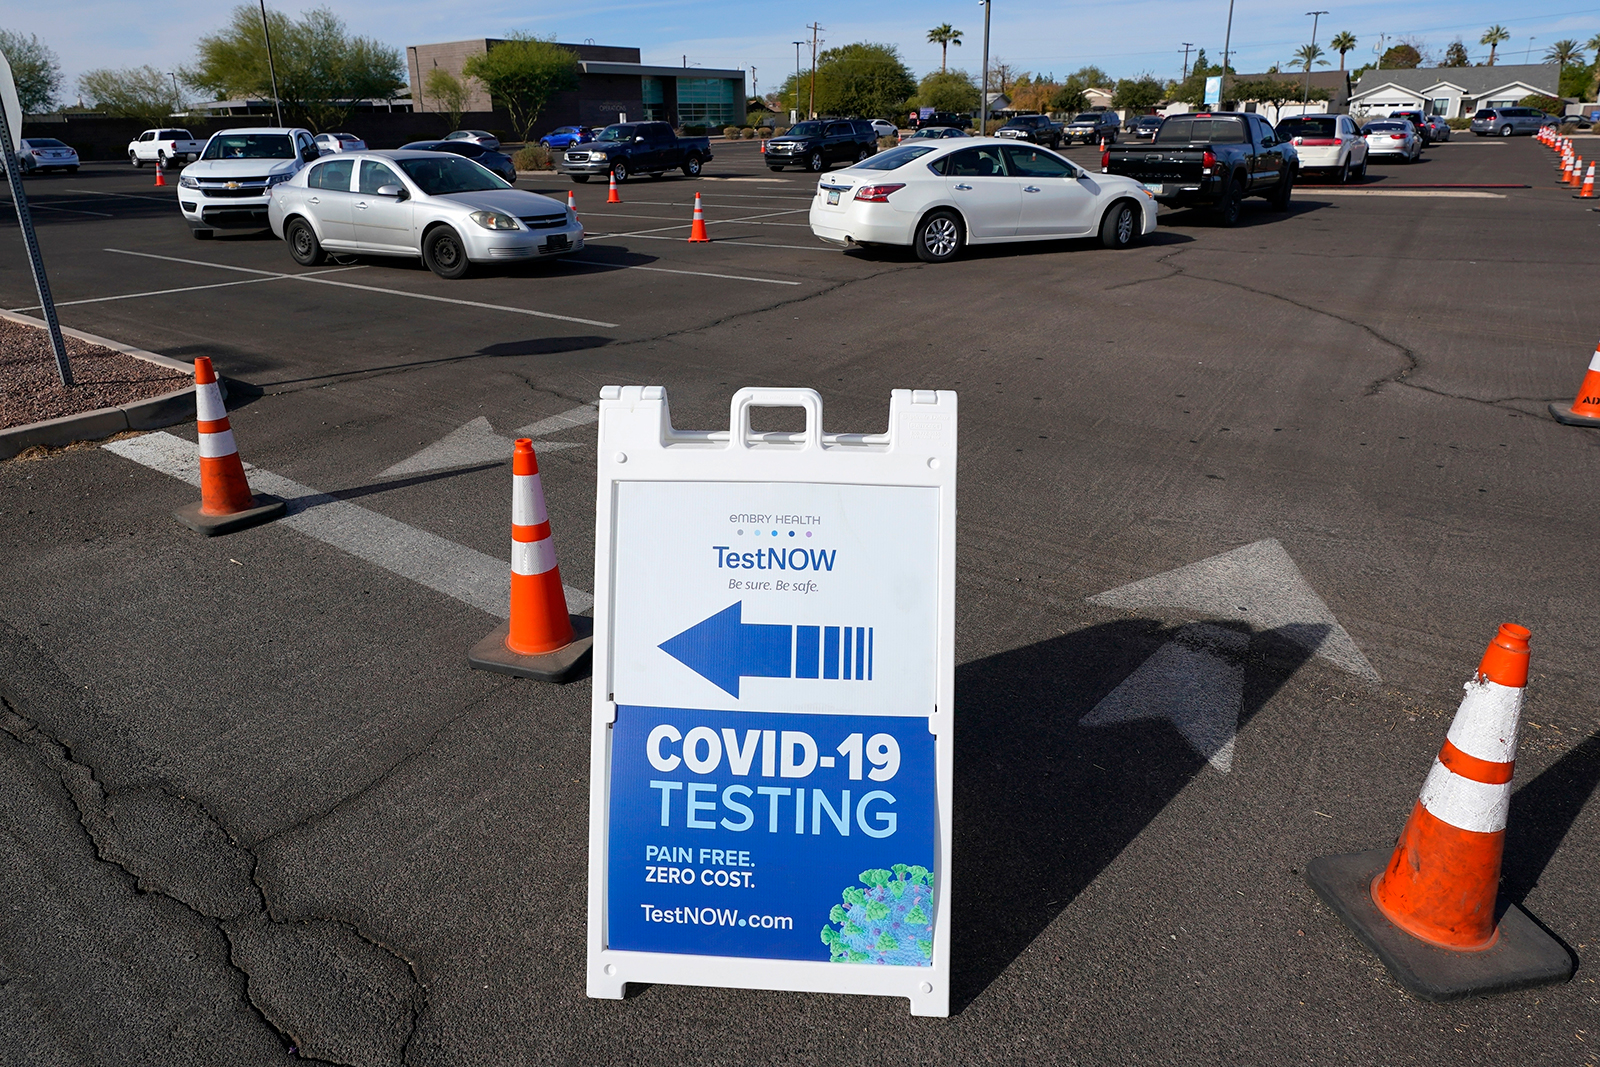 Vehicles line up as patrons wait for Covid-19 tests at a drive-thru testing center in Phoenix on Dec. 8, 2020.